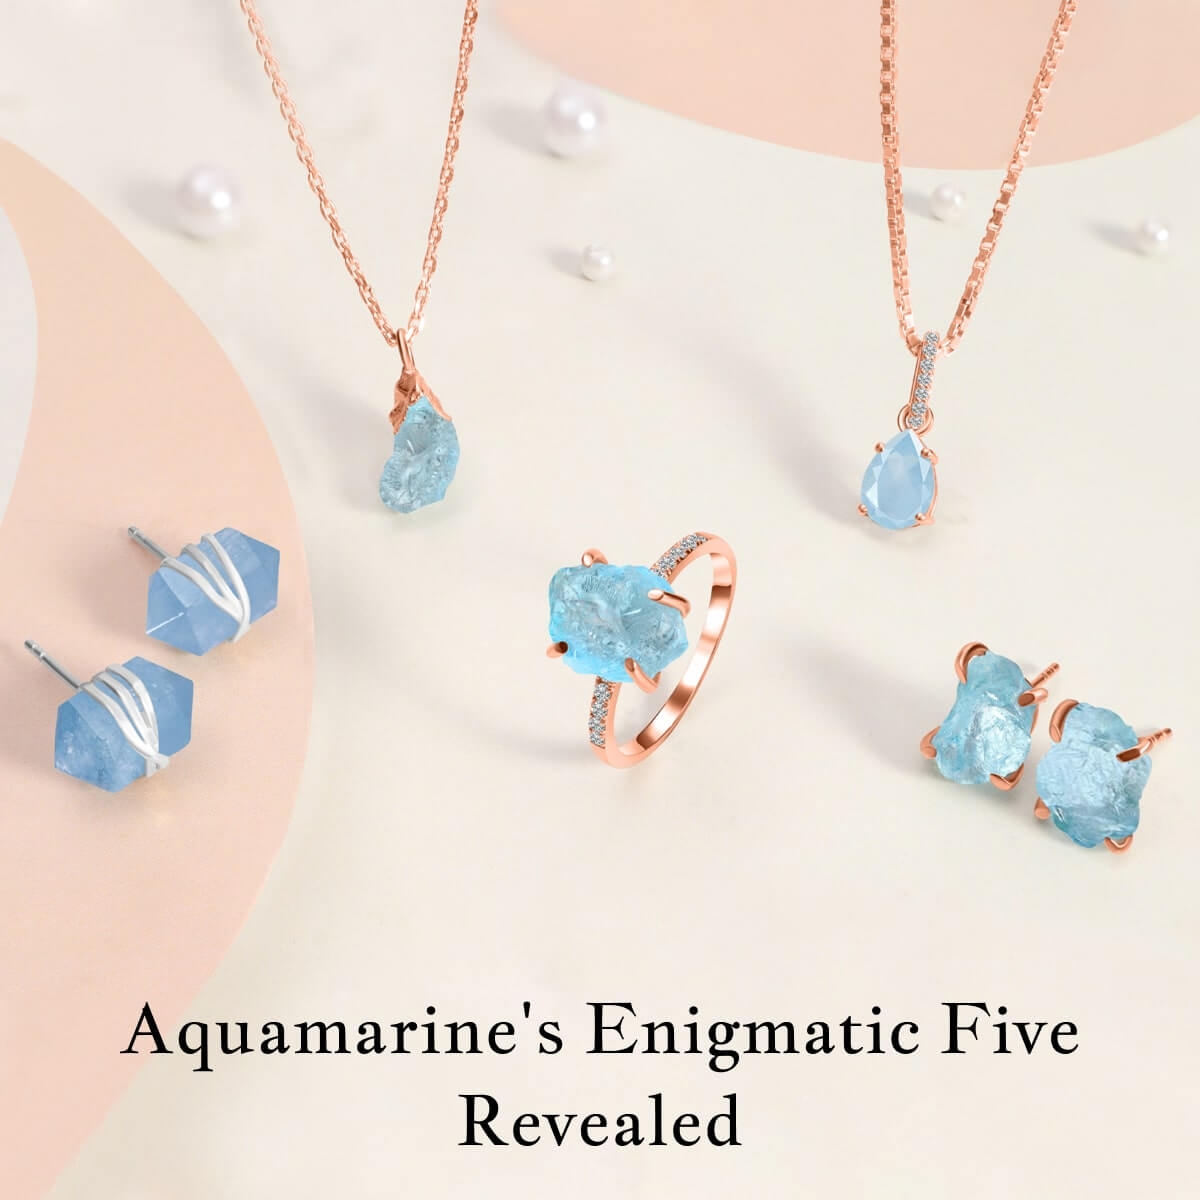 Five facts about Aquamarine